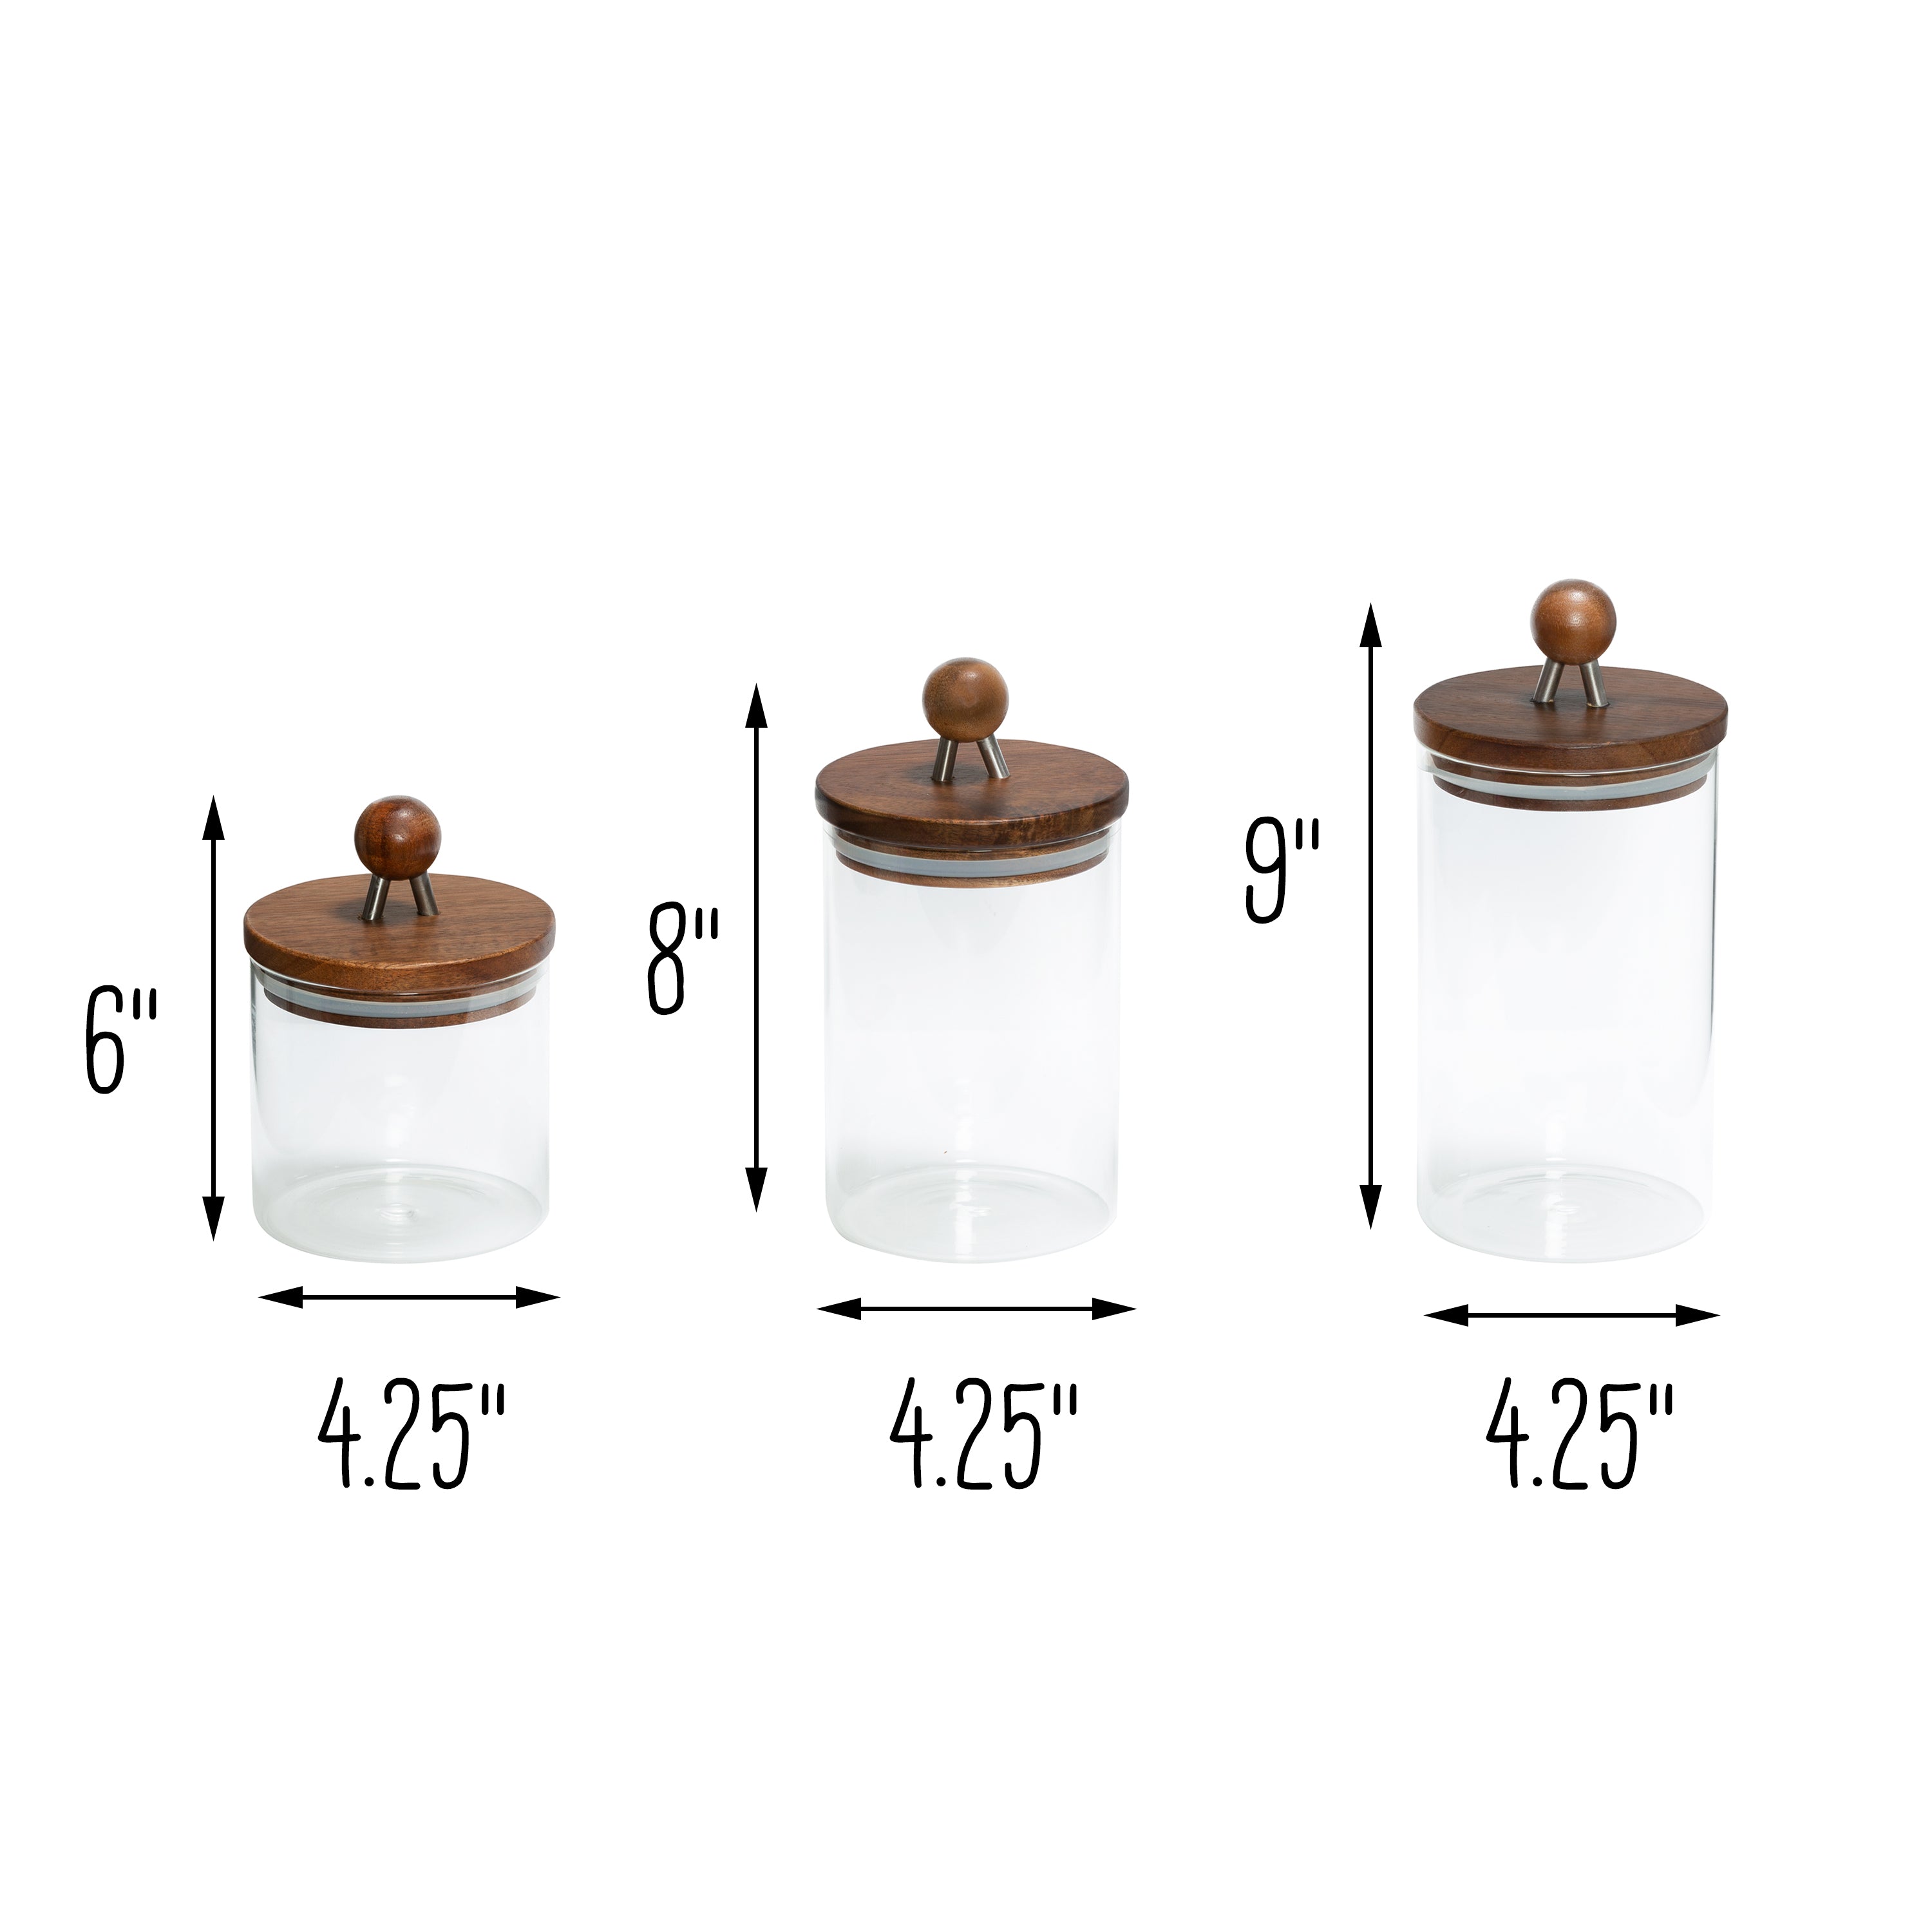 6-piece Glass Food Storage Container Set with Wood Lids